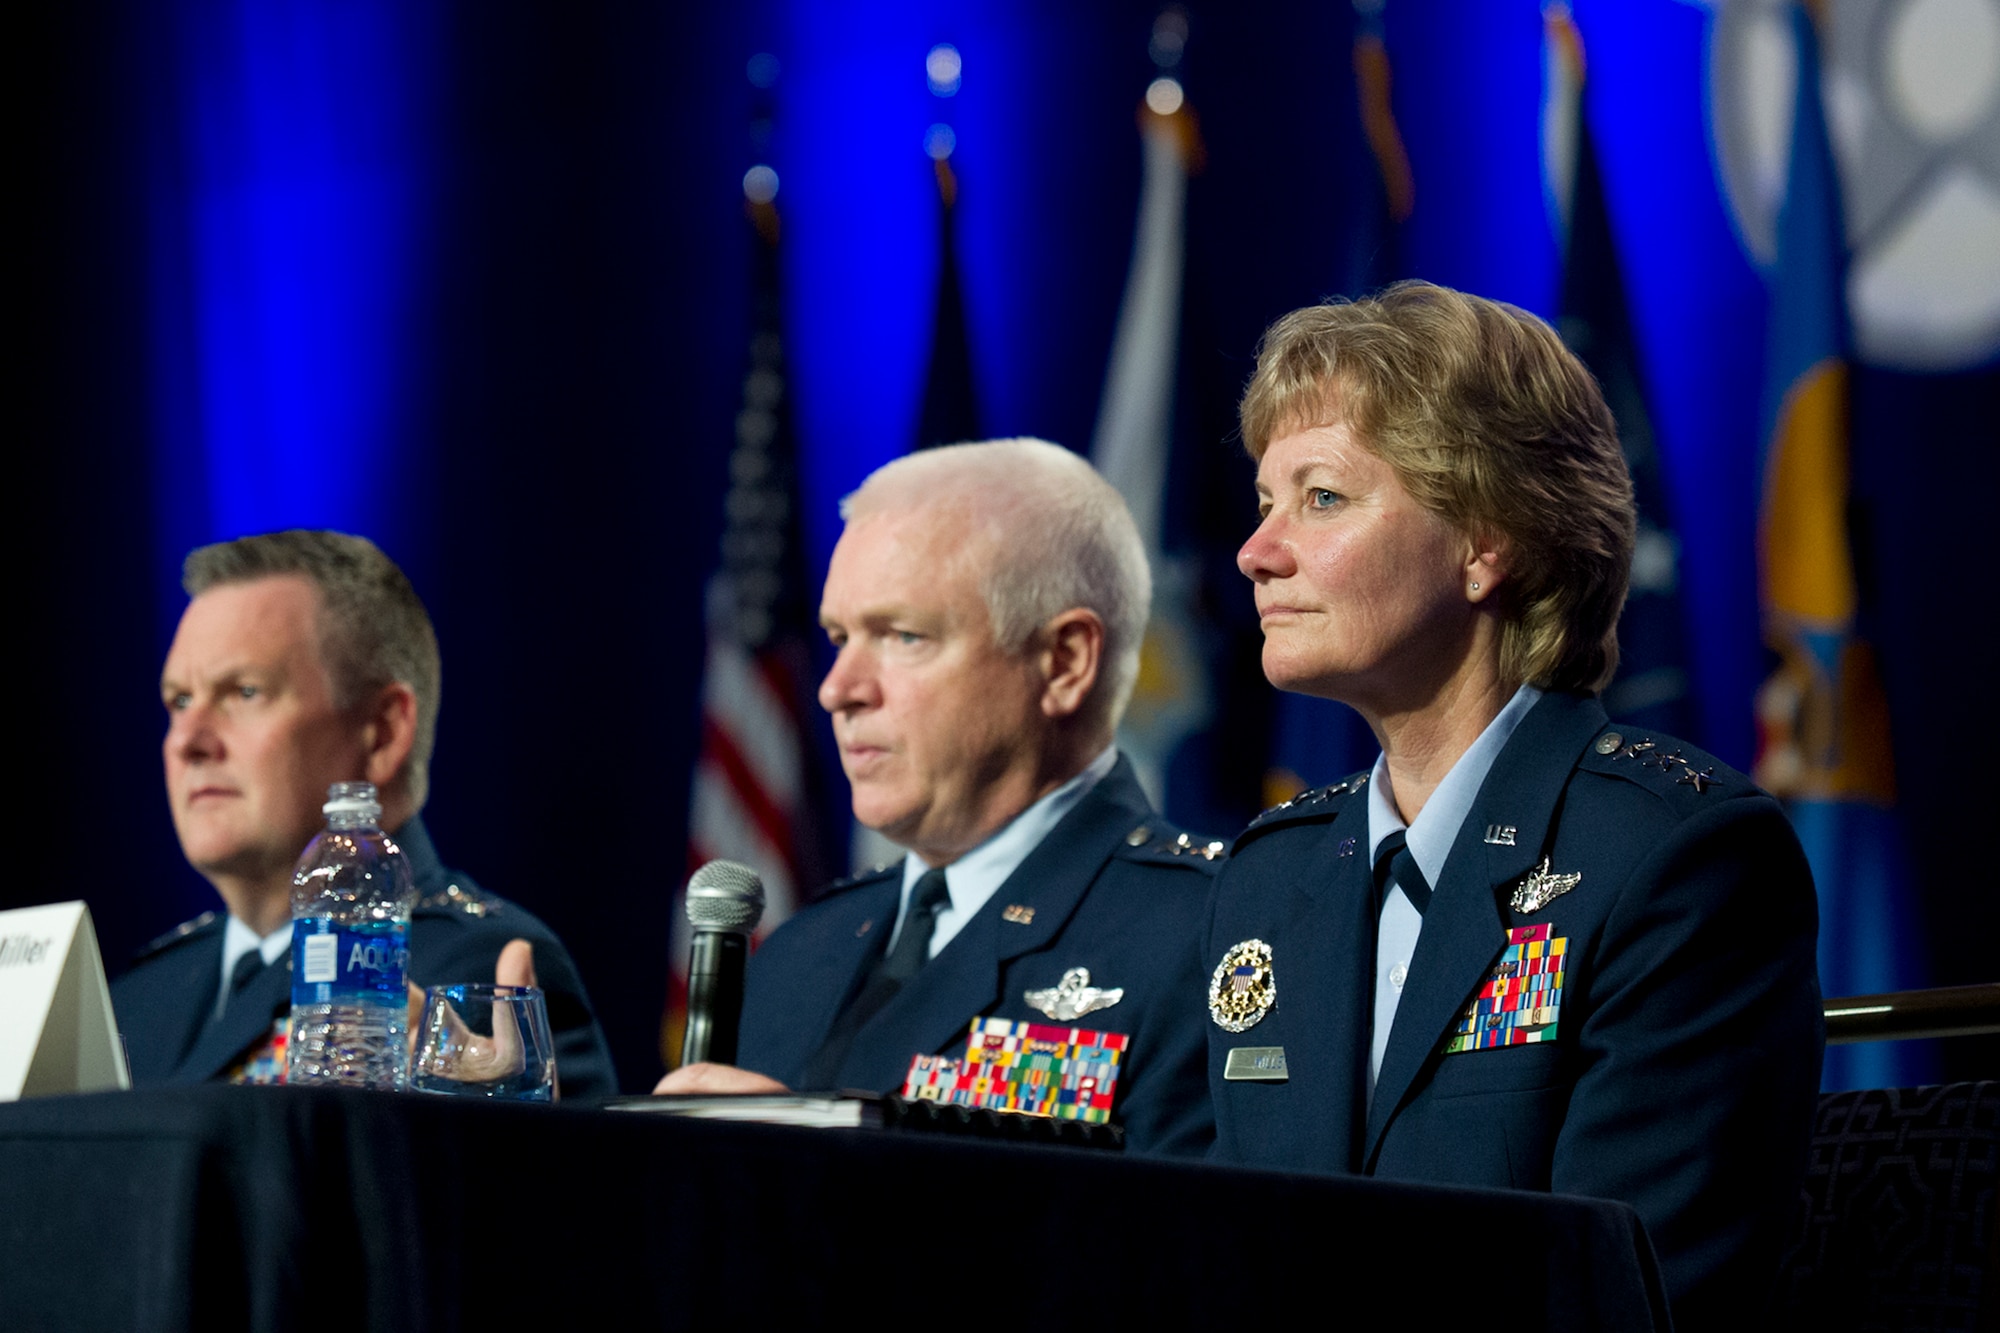 Lieutenant Gen. Maryanne Miller, chief of Air Force Reserve,
Headquarters U.S. Air Force, Washington, D.C., and commander, Air Force Reserve Command, Robins Air Force Base, Georgia, speaks during "Today's Air Force" panel at the Air Force Association Air, Space and Cyber Conference, Washington, D.C., Sept. 21, 2016. The panel of Air Force senior leadership fielded questions from the crowd in the areas of funding, manning, total force, contracting and many more. (U.S. Air Force photo/Staff Sgt. Kat Justen)
